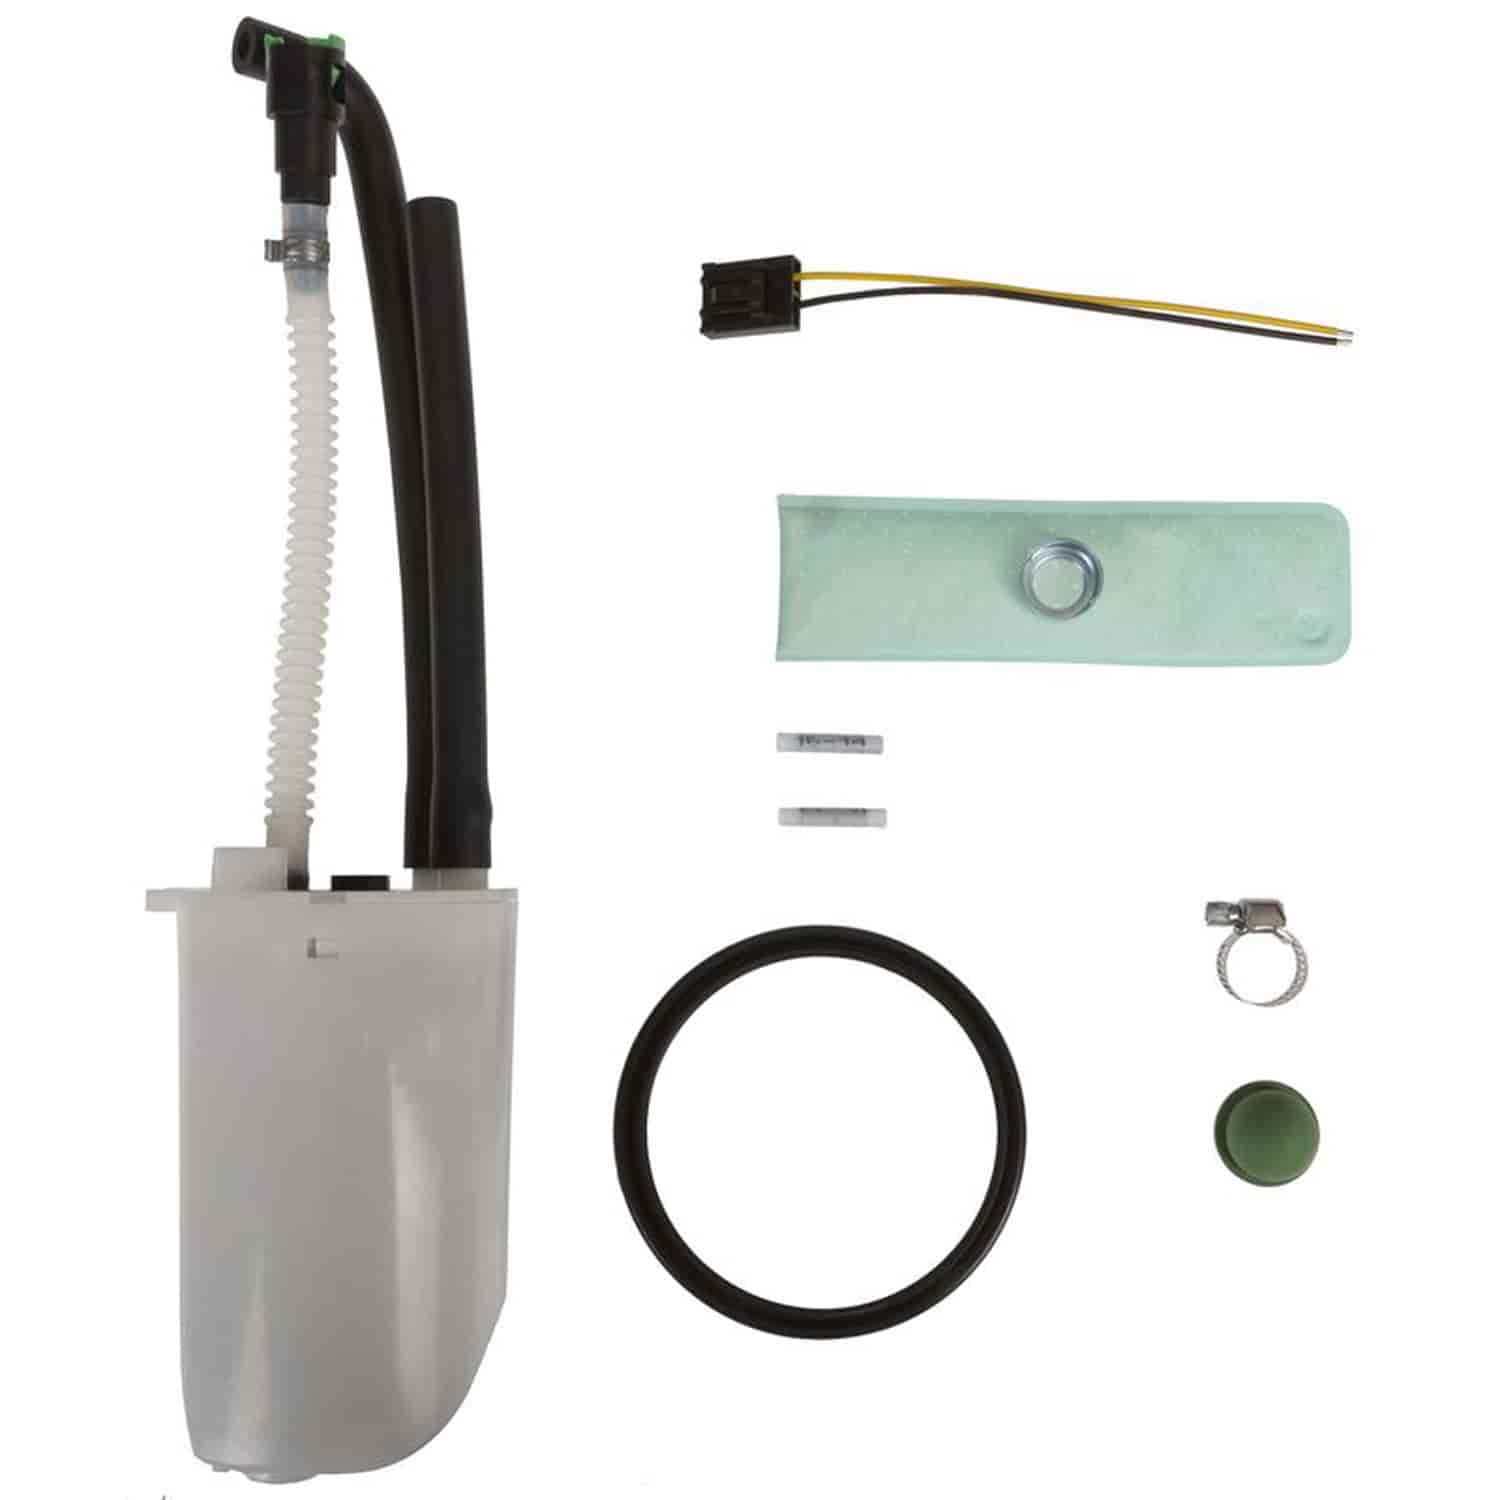 EFI In-Tank Electric Fuel Pump and Strainer Set for 1993-1995 Camaro/Firebird